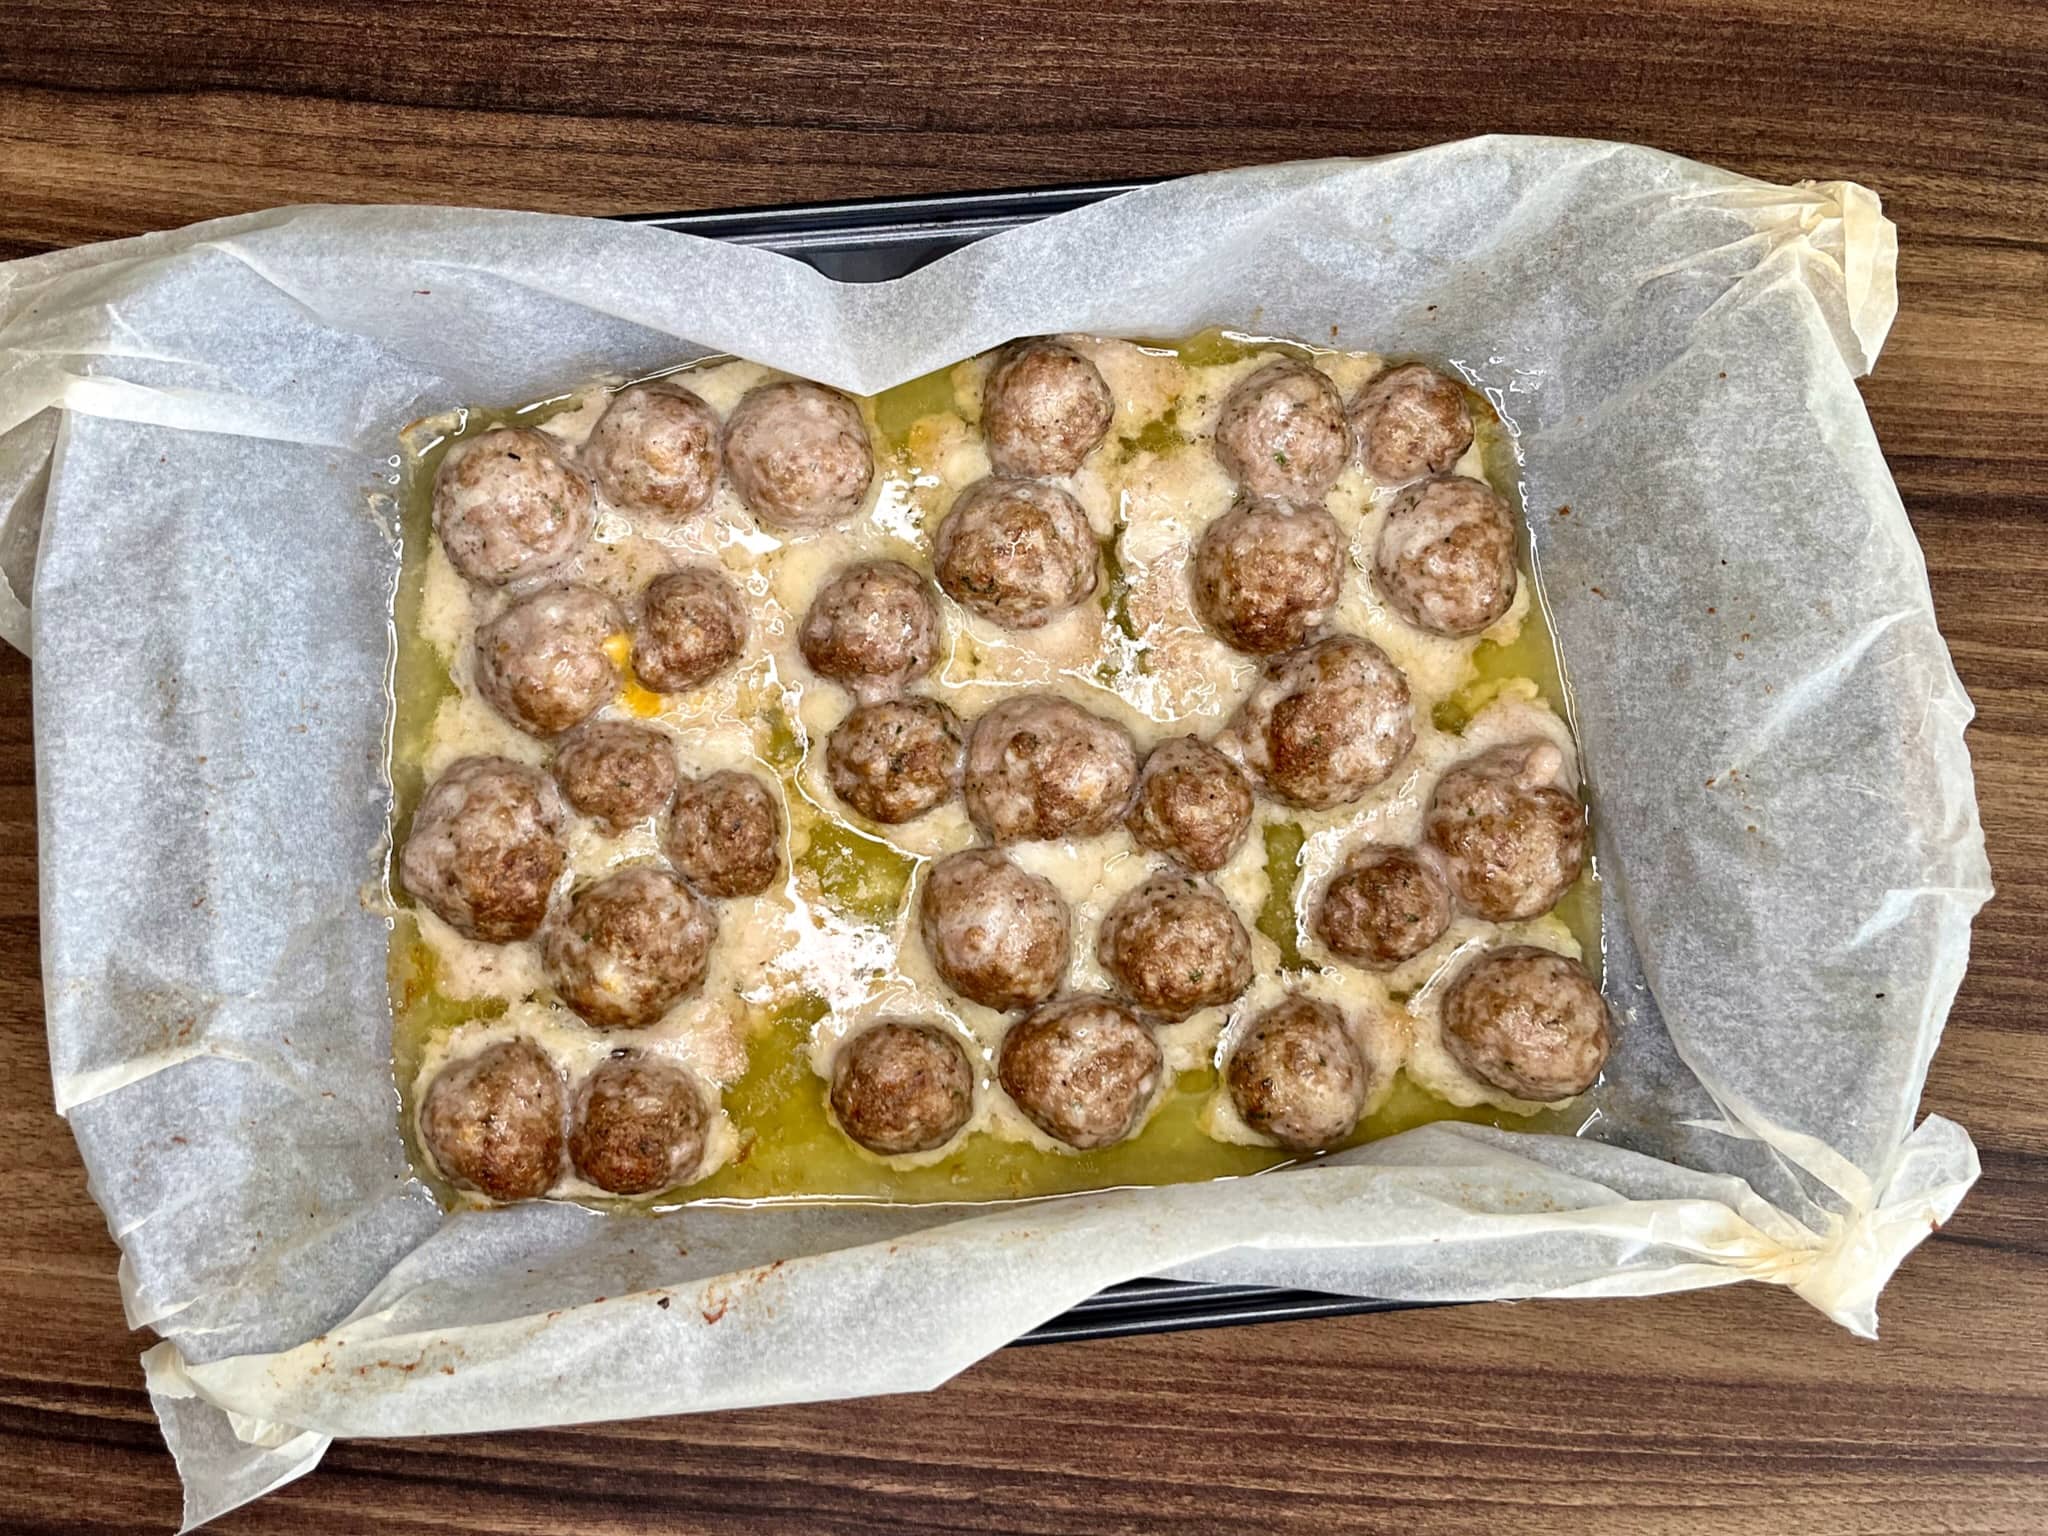 Meatballs taken out of the oven